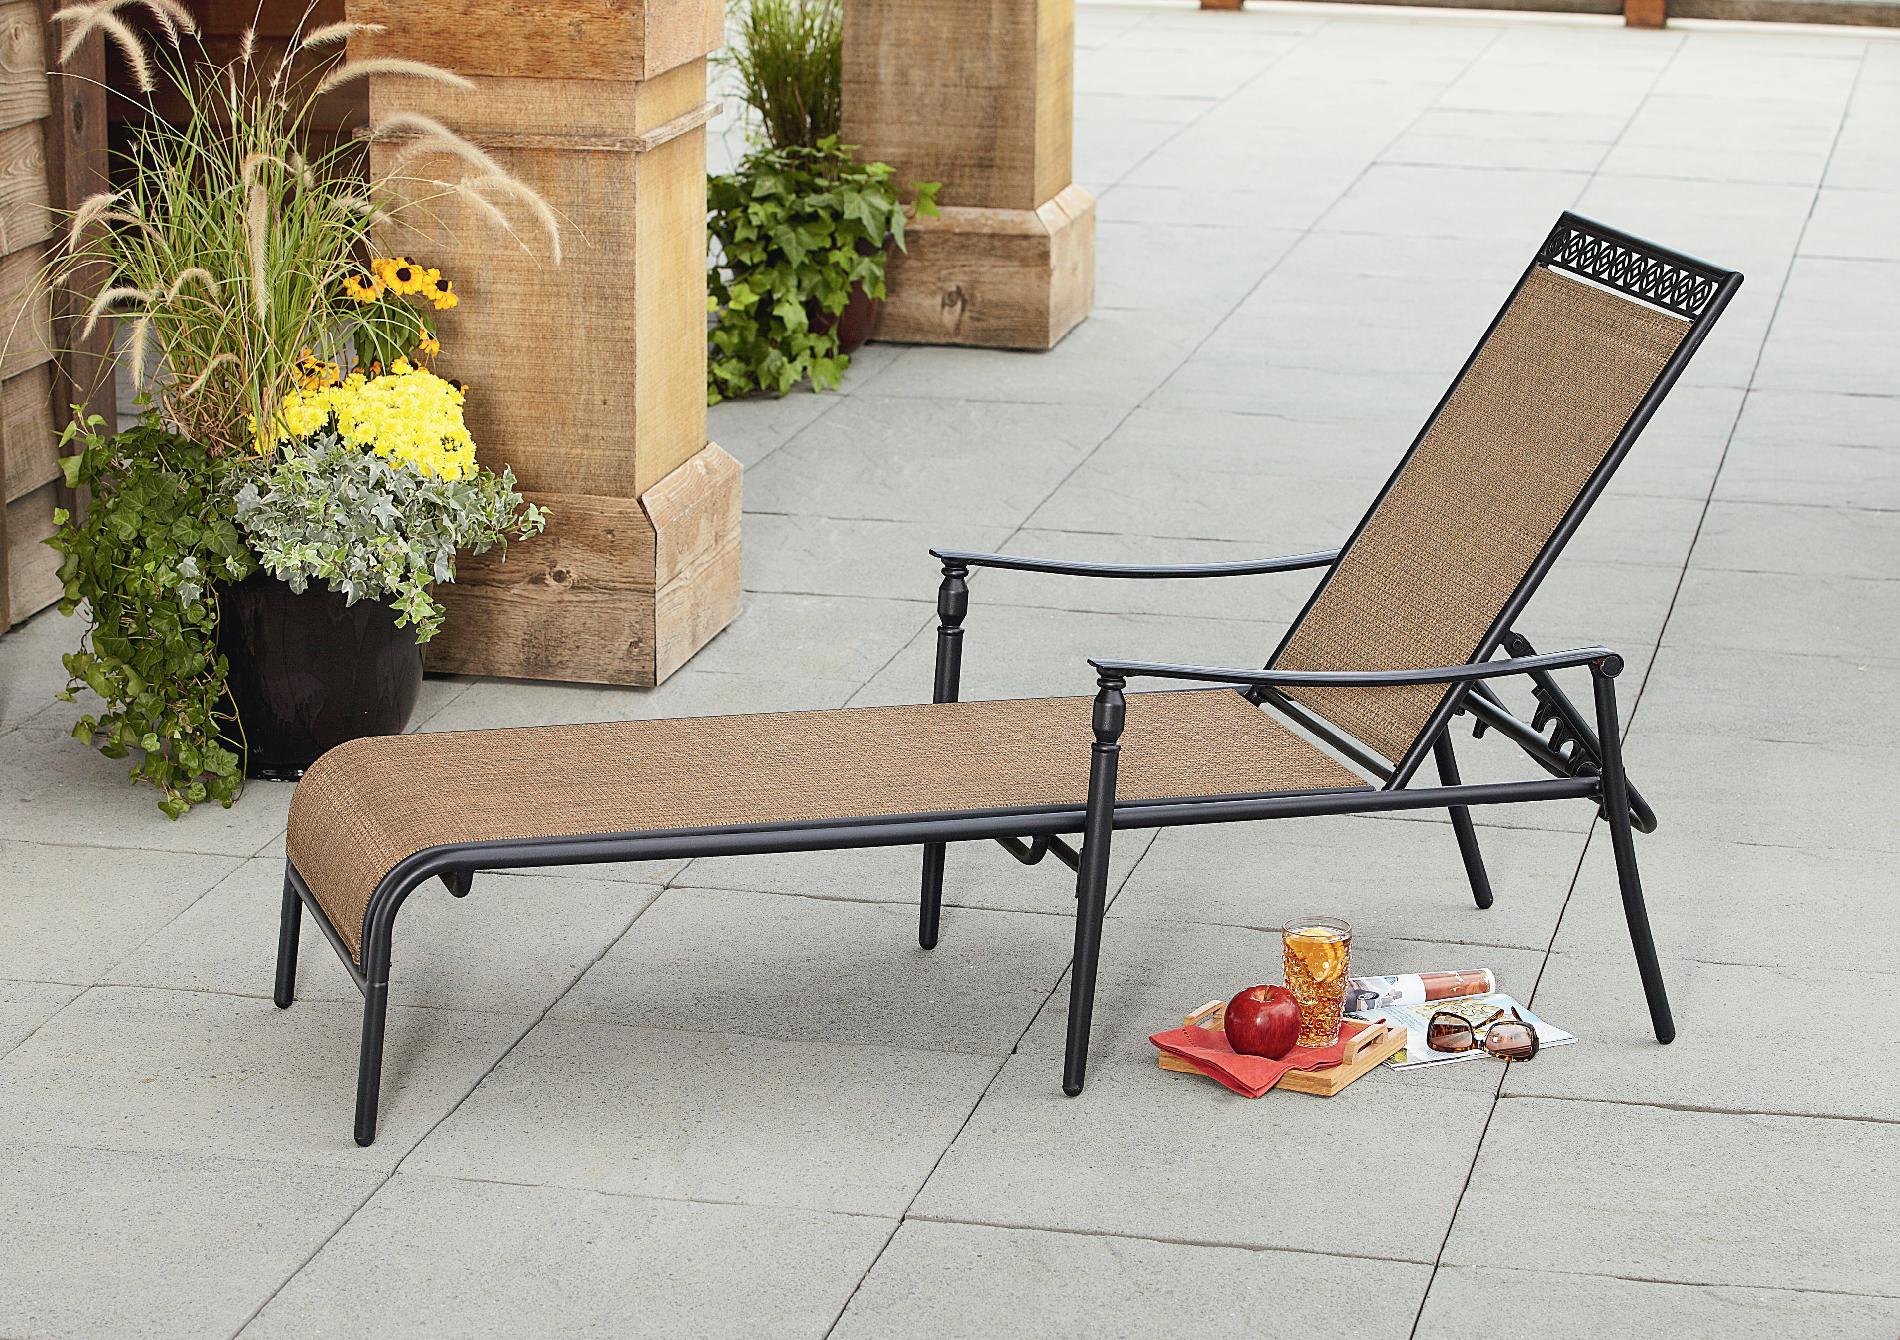 La-Z-Boy Outdoor Ethan Chaise Lounge - Outdoor Living ...